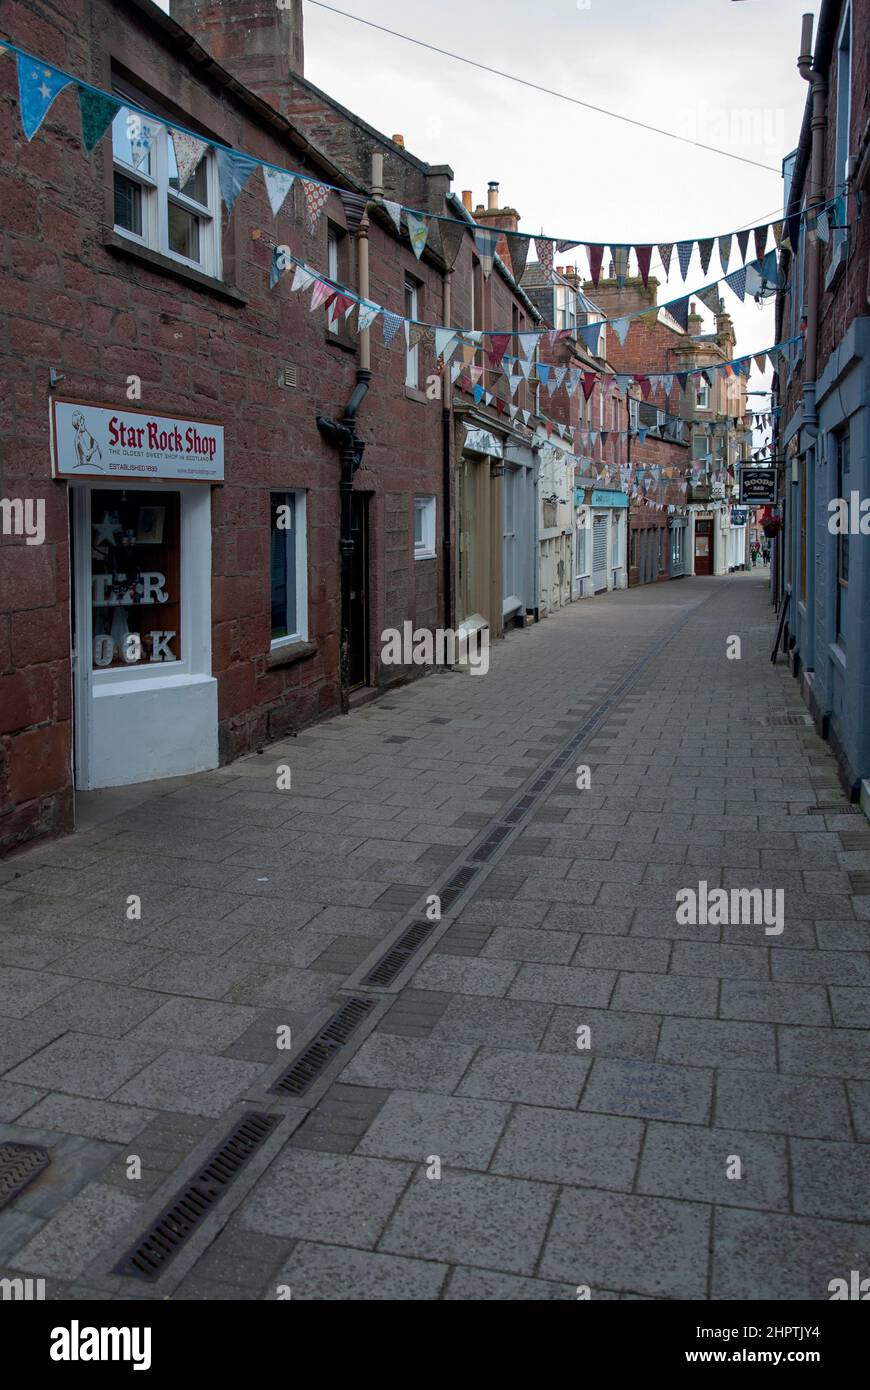 Streetscape Roods Shopping and Residential Street Kirriemuir Angus Scotland United Kingdom portrait view of pedestrianised alley lane close walkway st Stock Photo